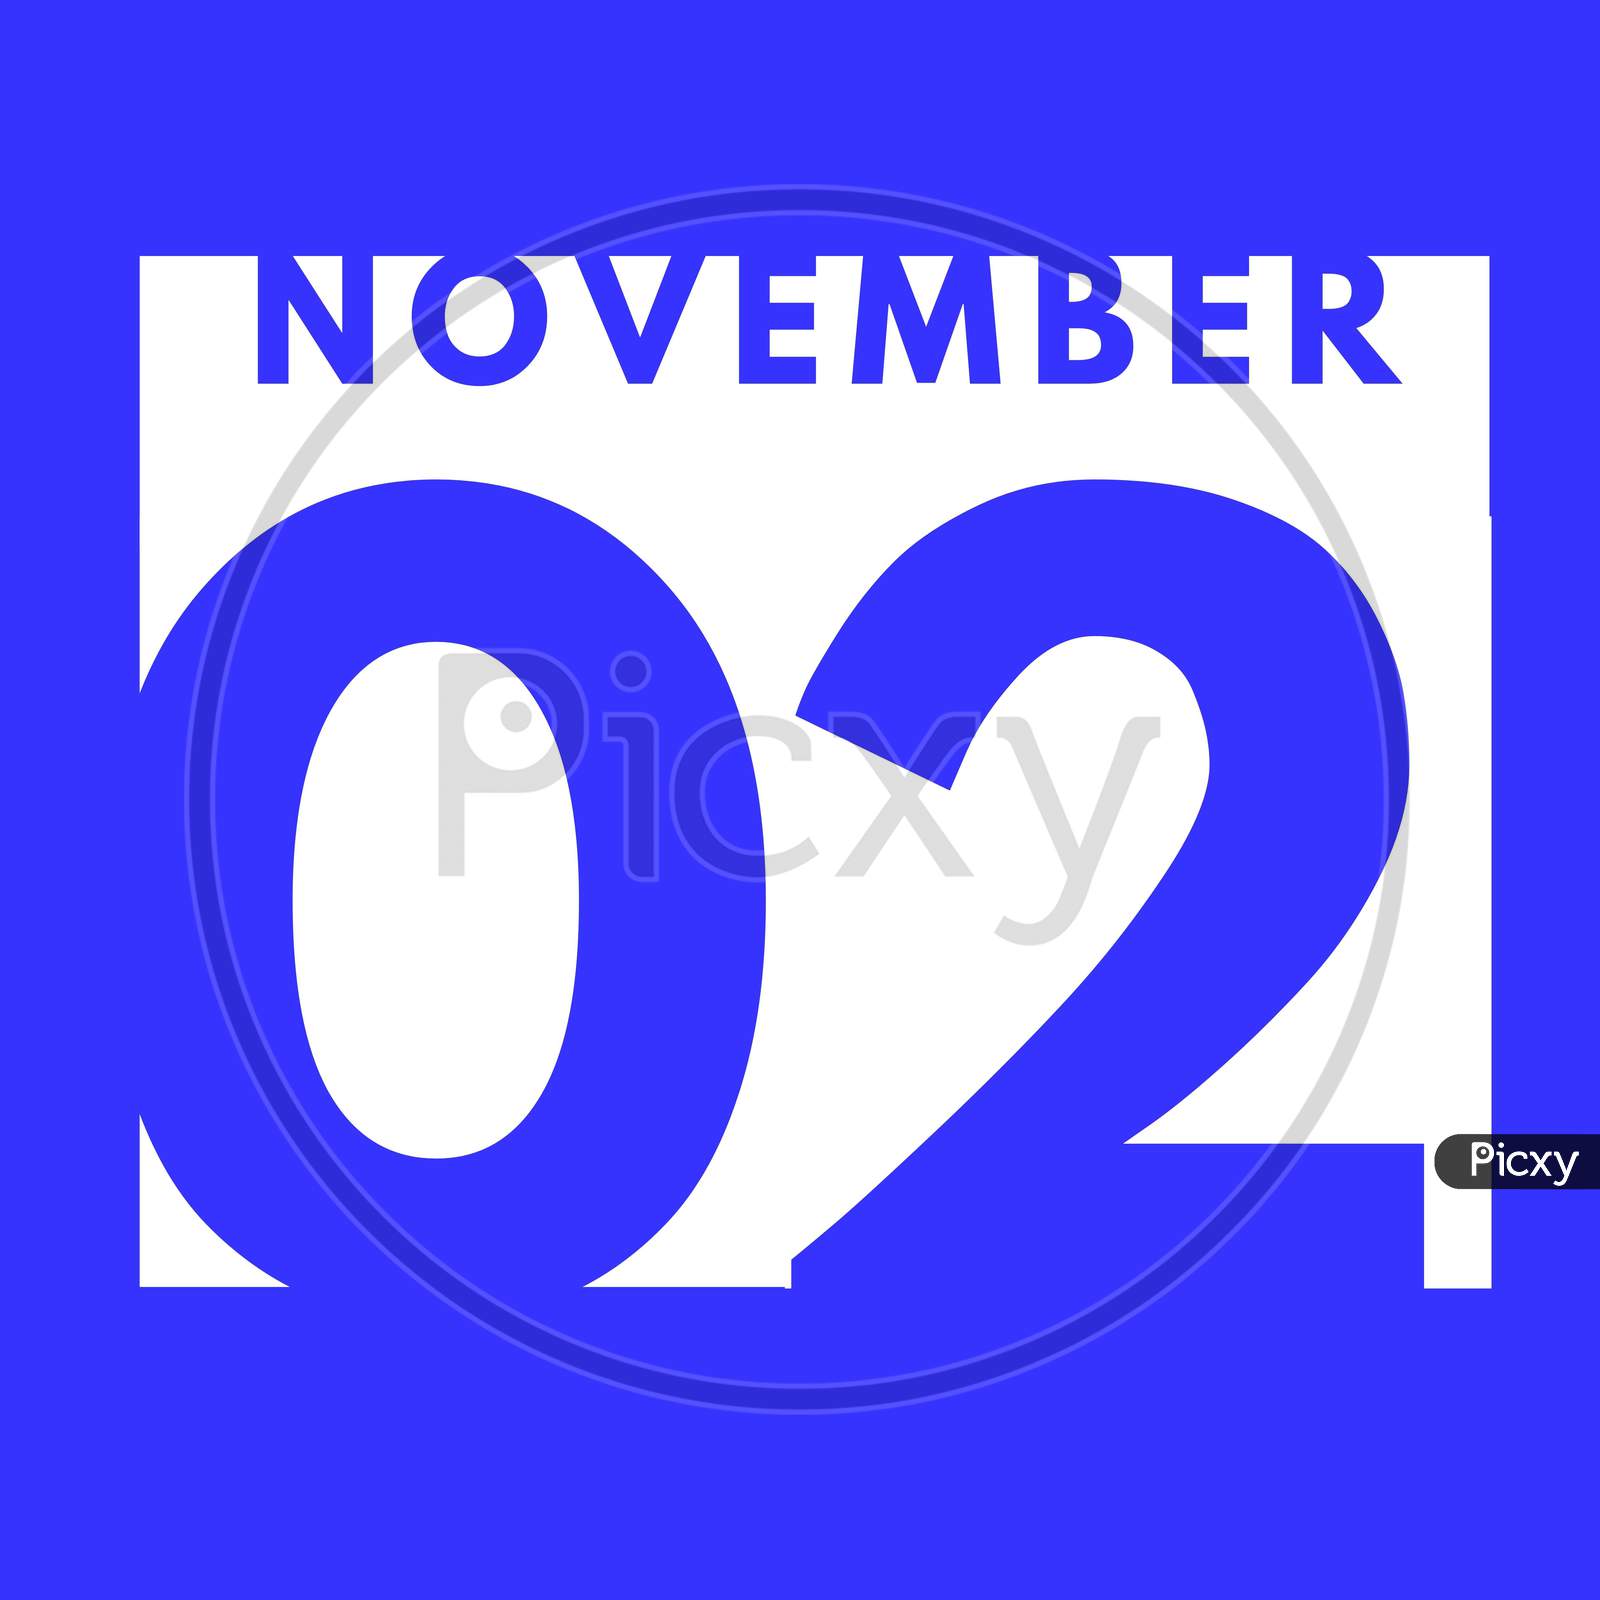 November 2 . Flat Modern Daily Calendar Icon .Date ,Day, Month .Calendar For The Month Of November